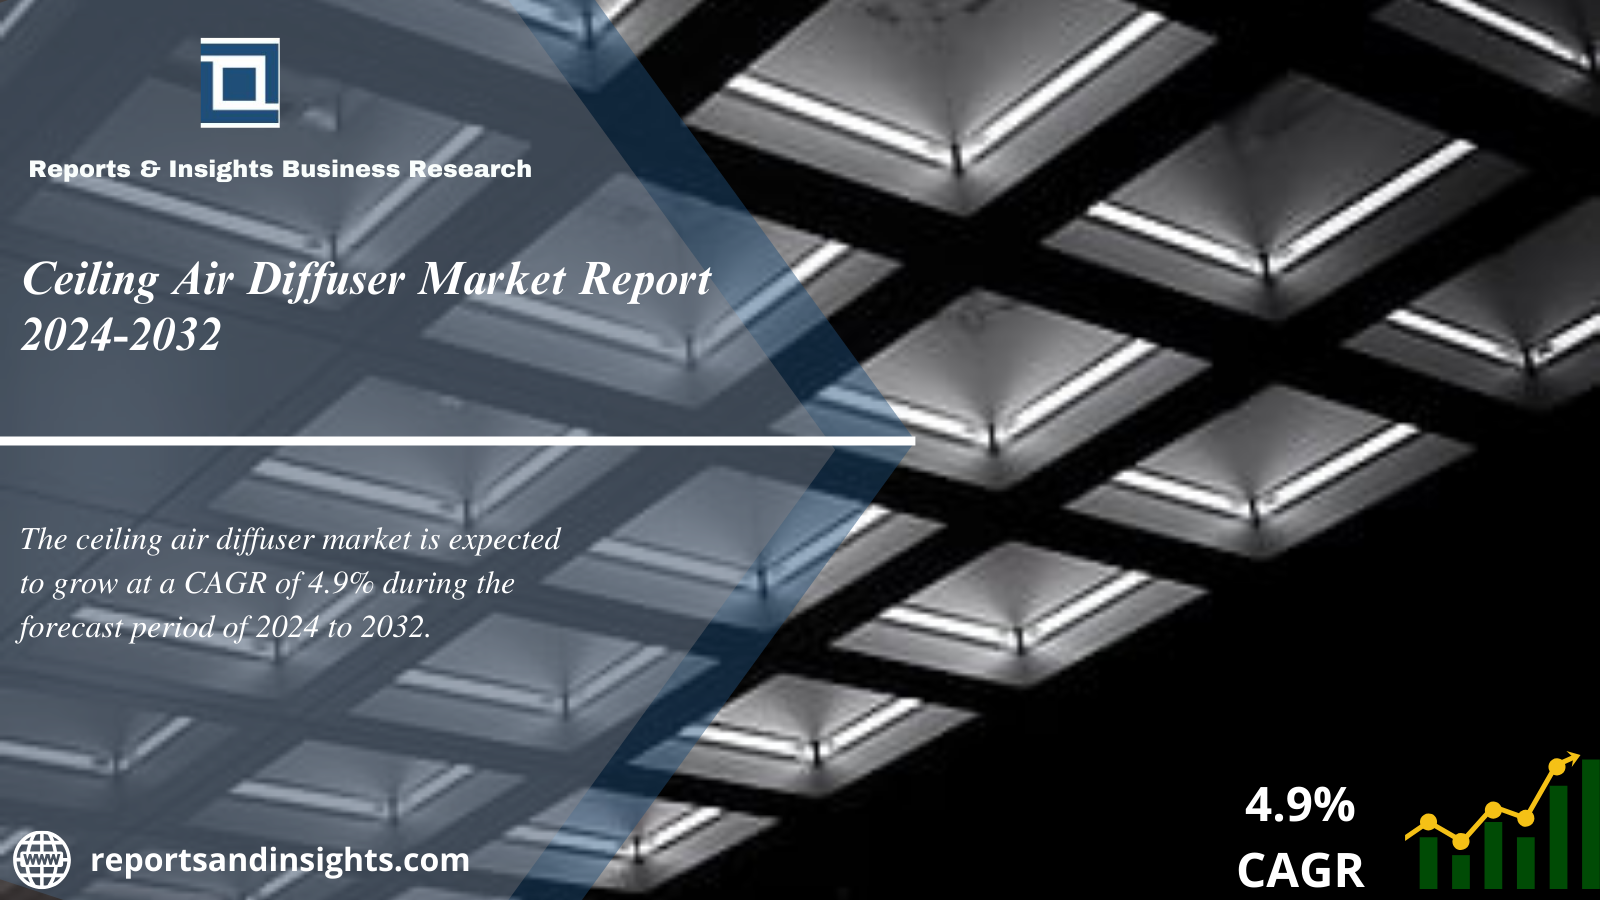 Ceiling Air Diffuser Market Report 2024 to 2032: Trends, Share, Size, Growth and Forecast